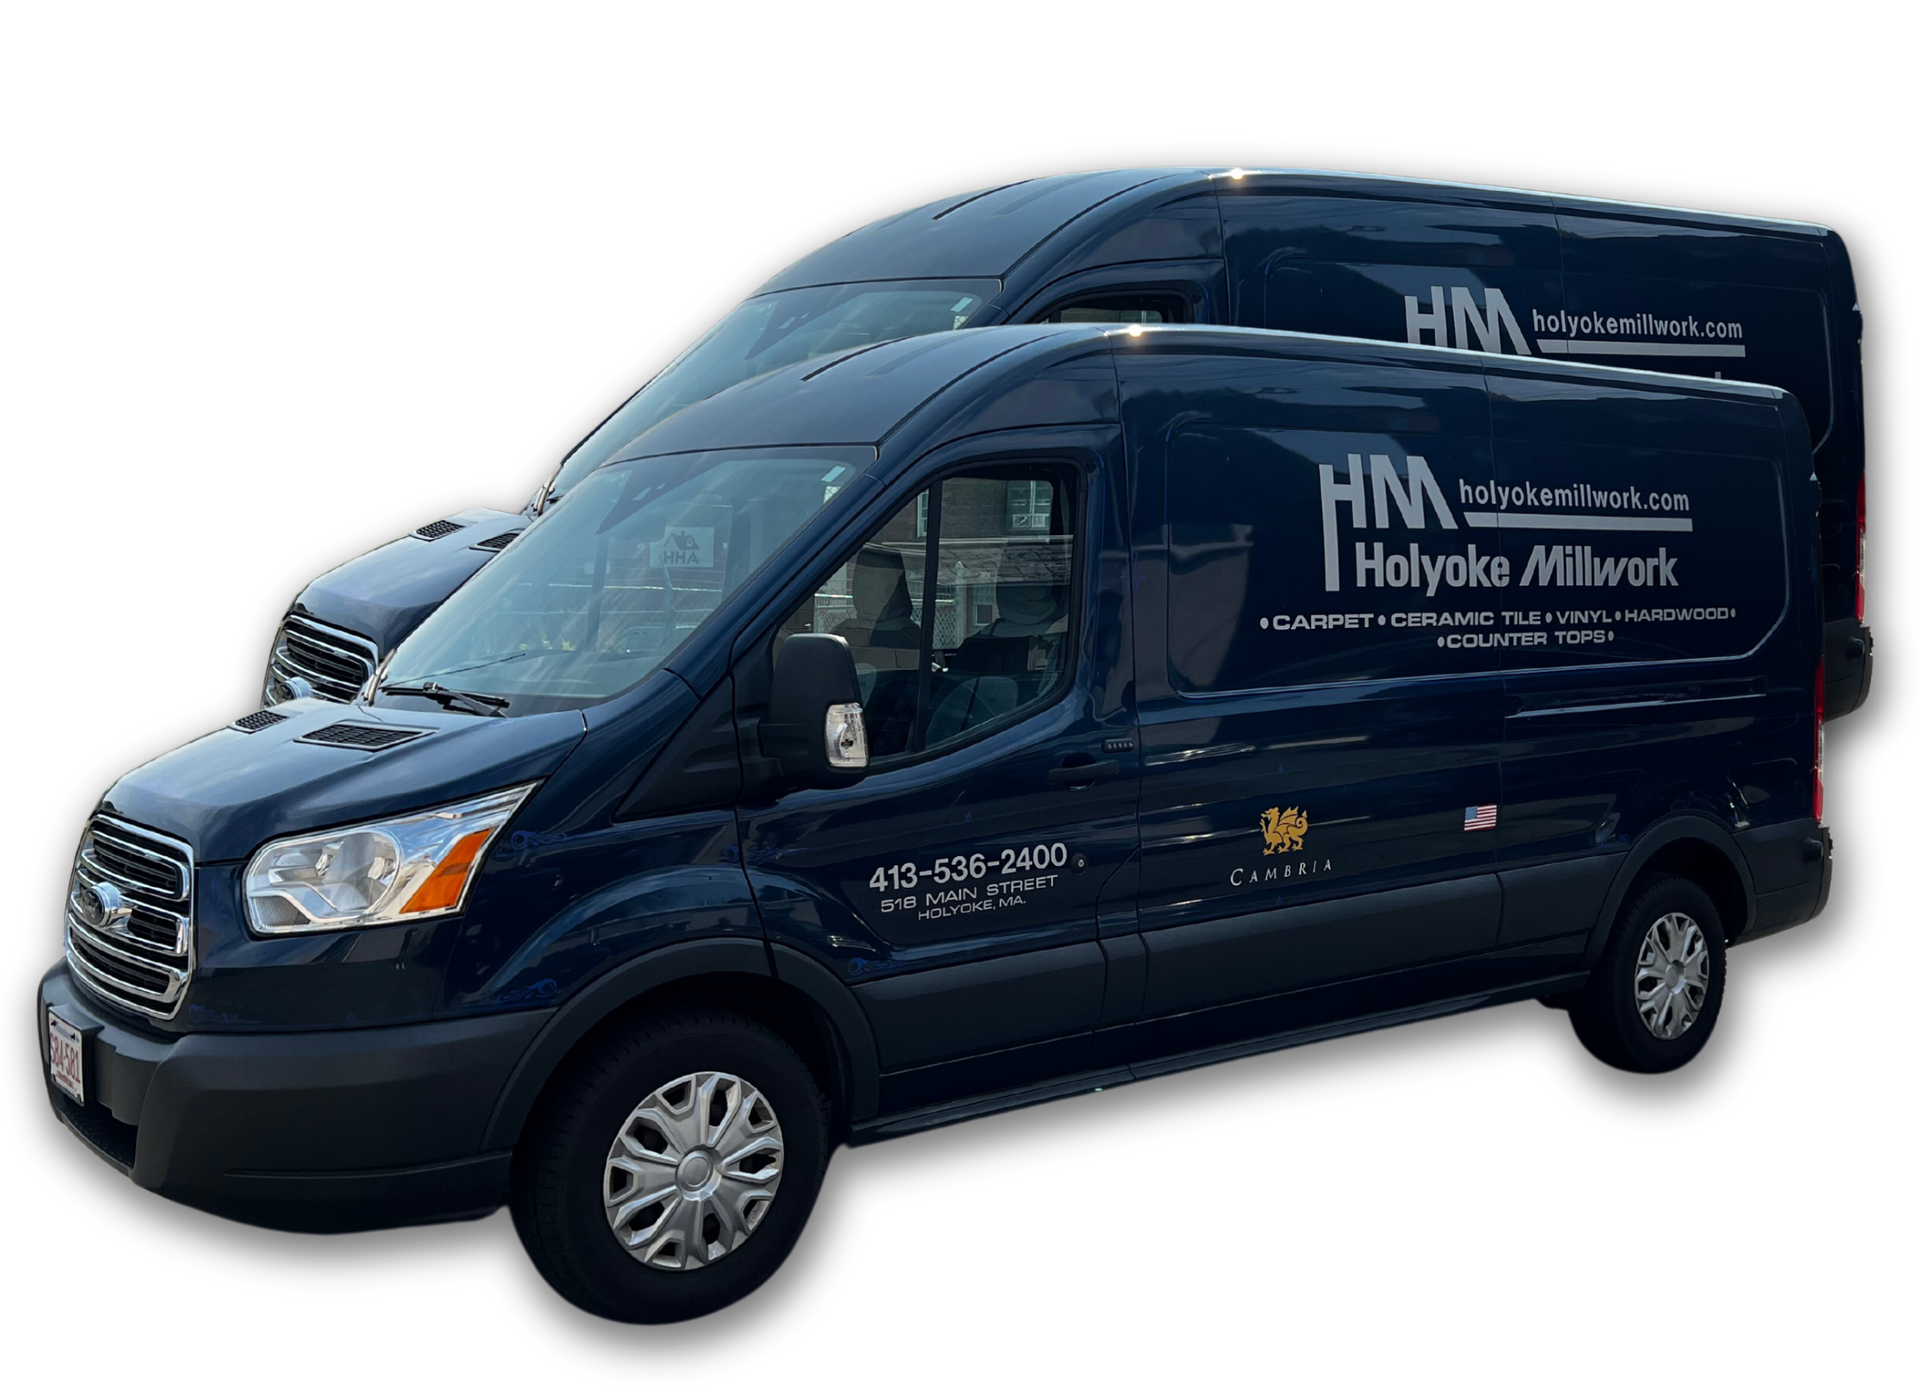 a navy blue van says Holyoke Millwork in Holyoke, MA on the side